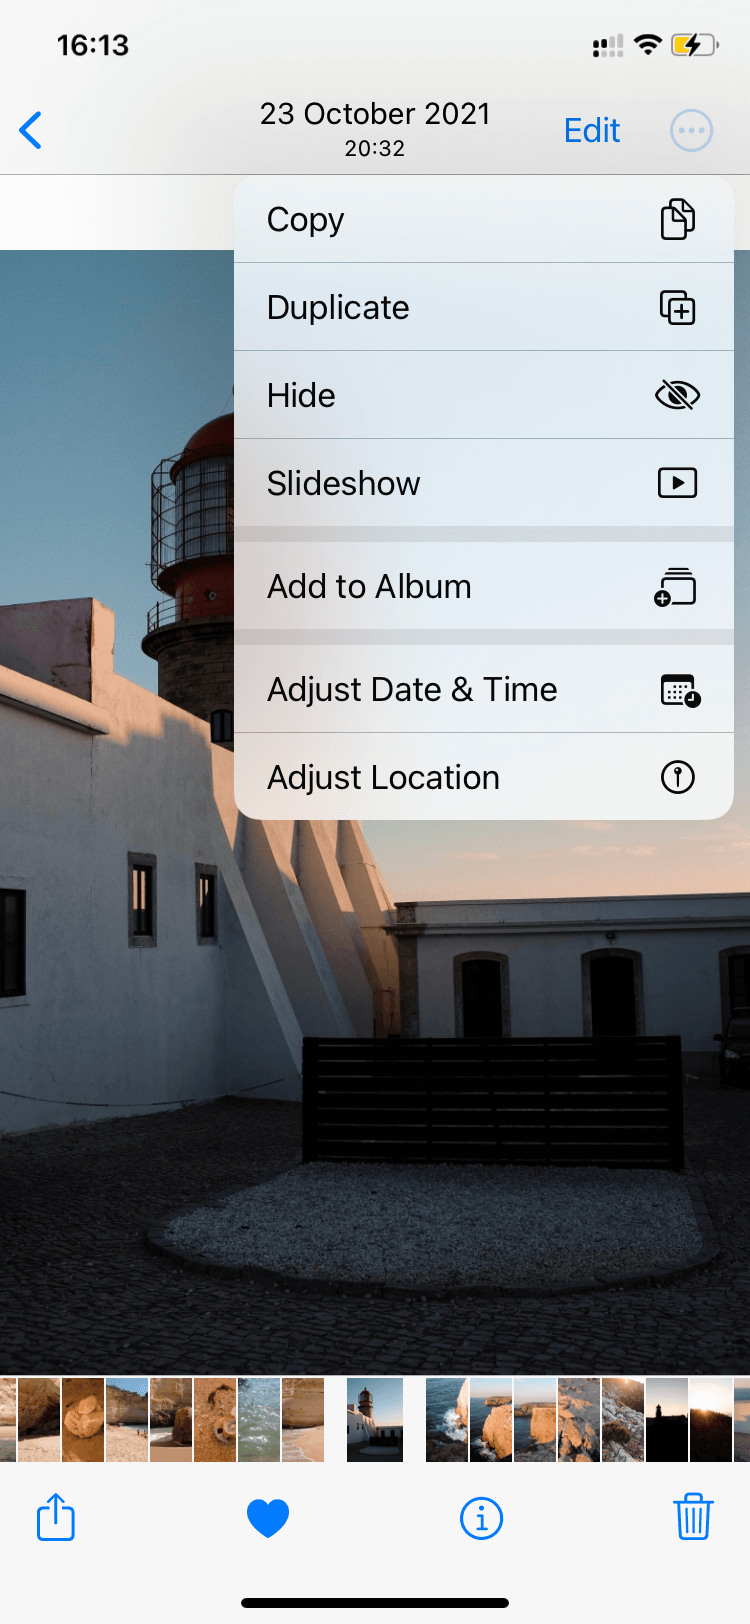 How to hide iPhone photos in the Photos app: Screenshot 1